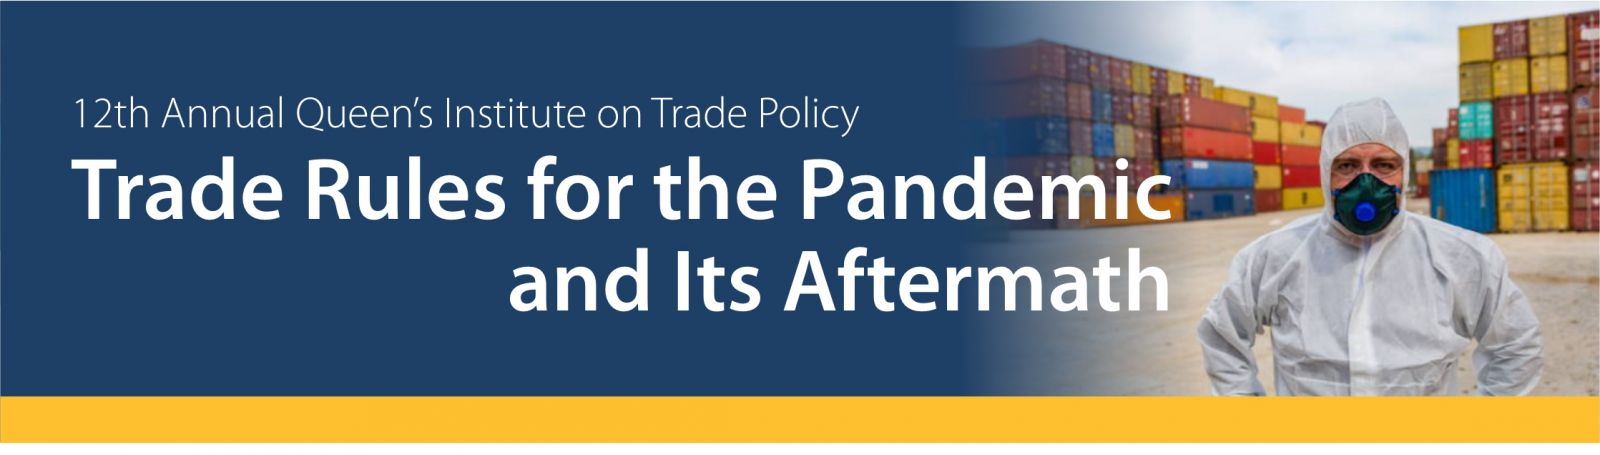 2020Queen's Institute on Trade Policy: Trade Rules for the Pandemic and Its Aftermath  - Nov 23 - 27, 2020 [image]